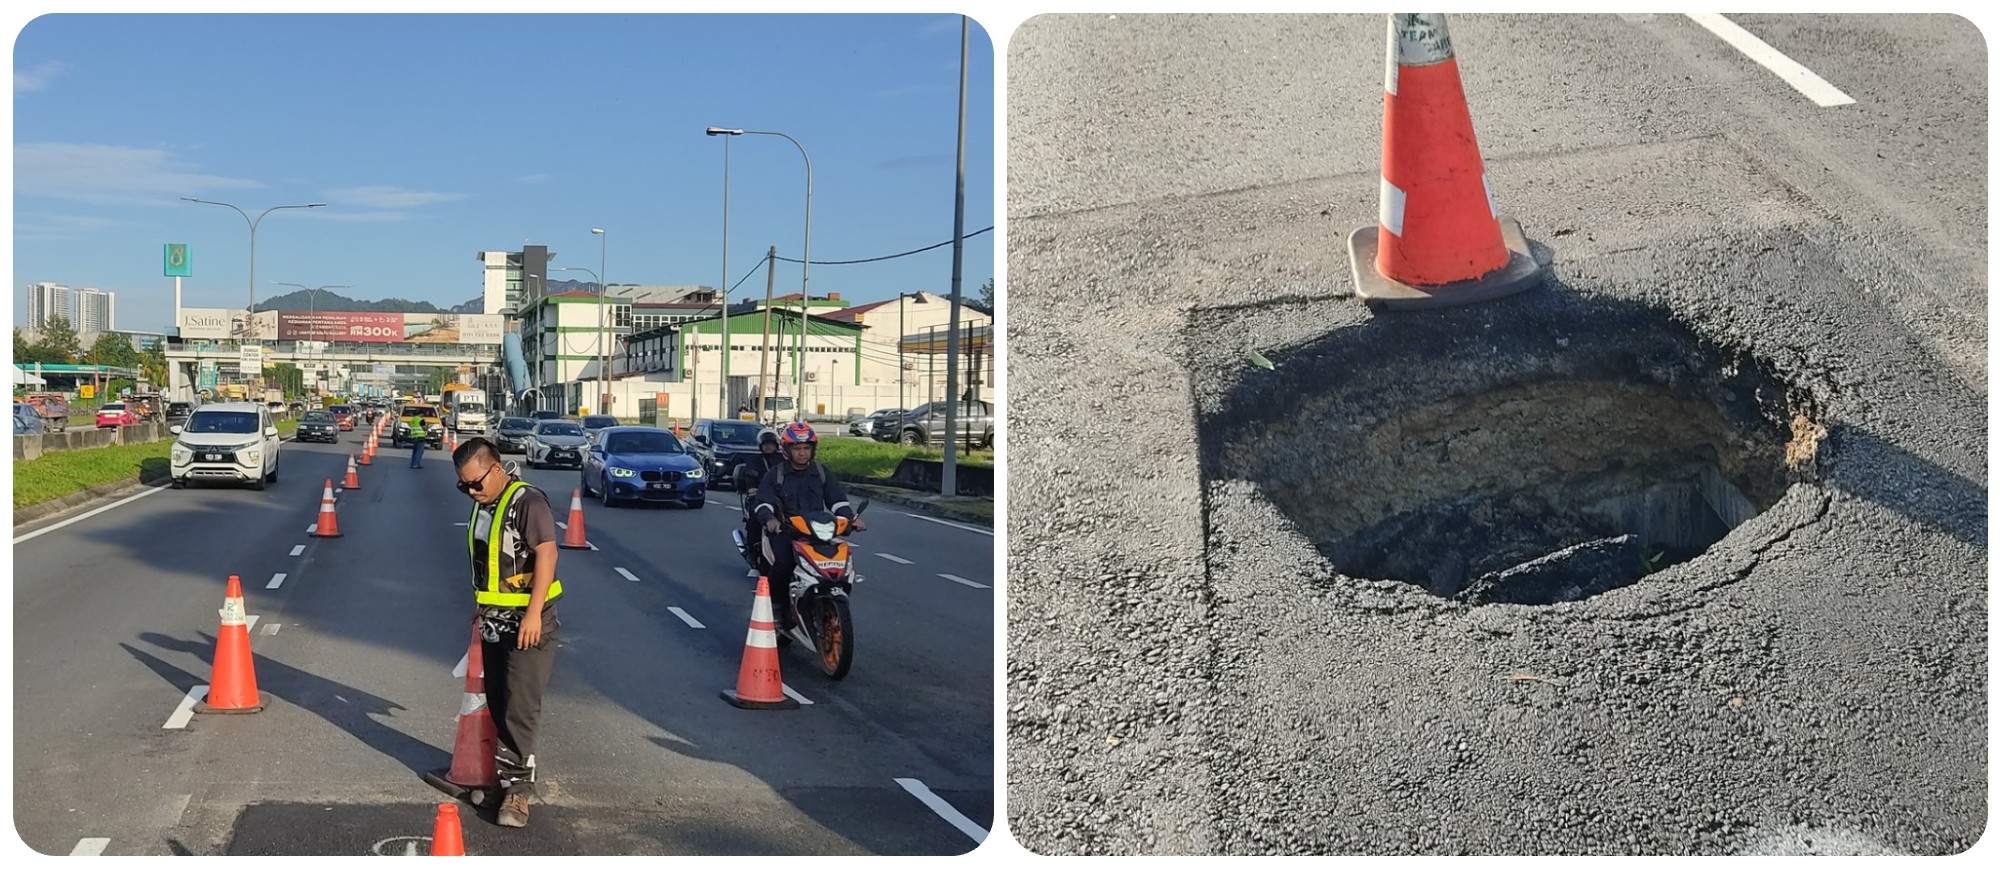 Road closure on MRR2 enroute to Ampang from 10pm to 5am for sinkhole repair